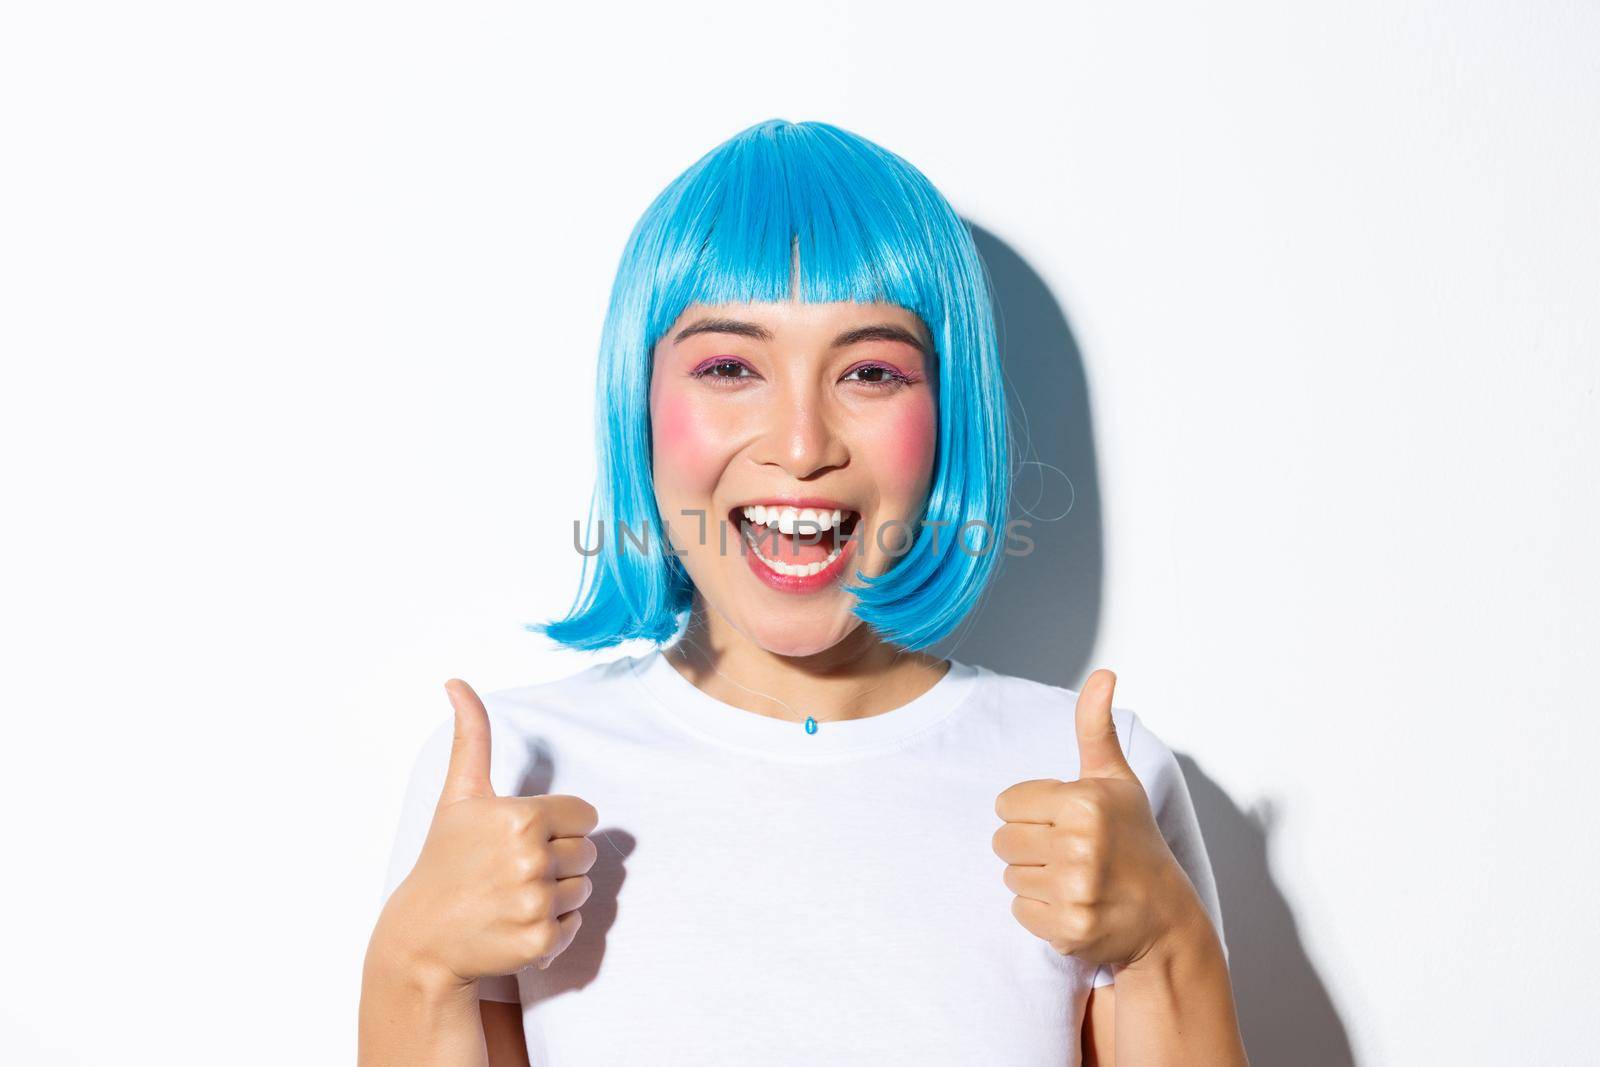 Portrait of happy smiling girl in blue wig, showing thumbs-up in approval.